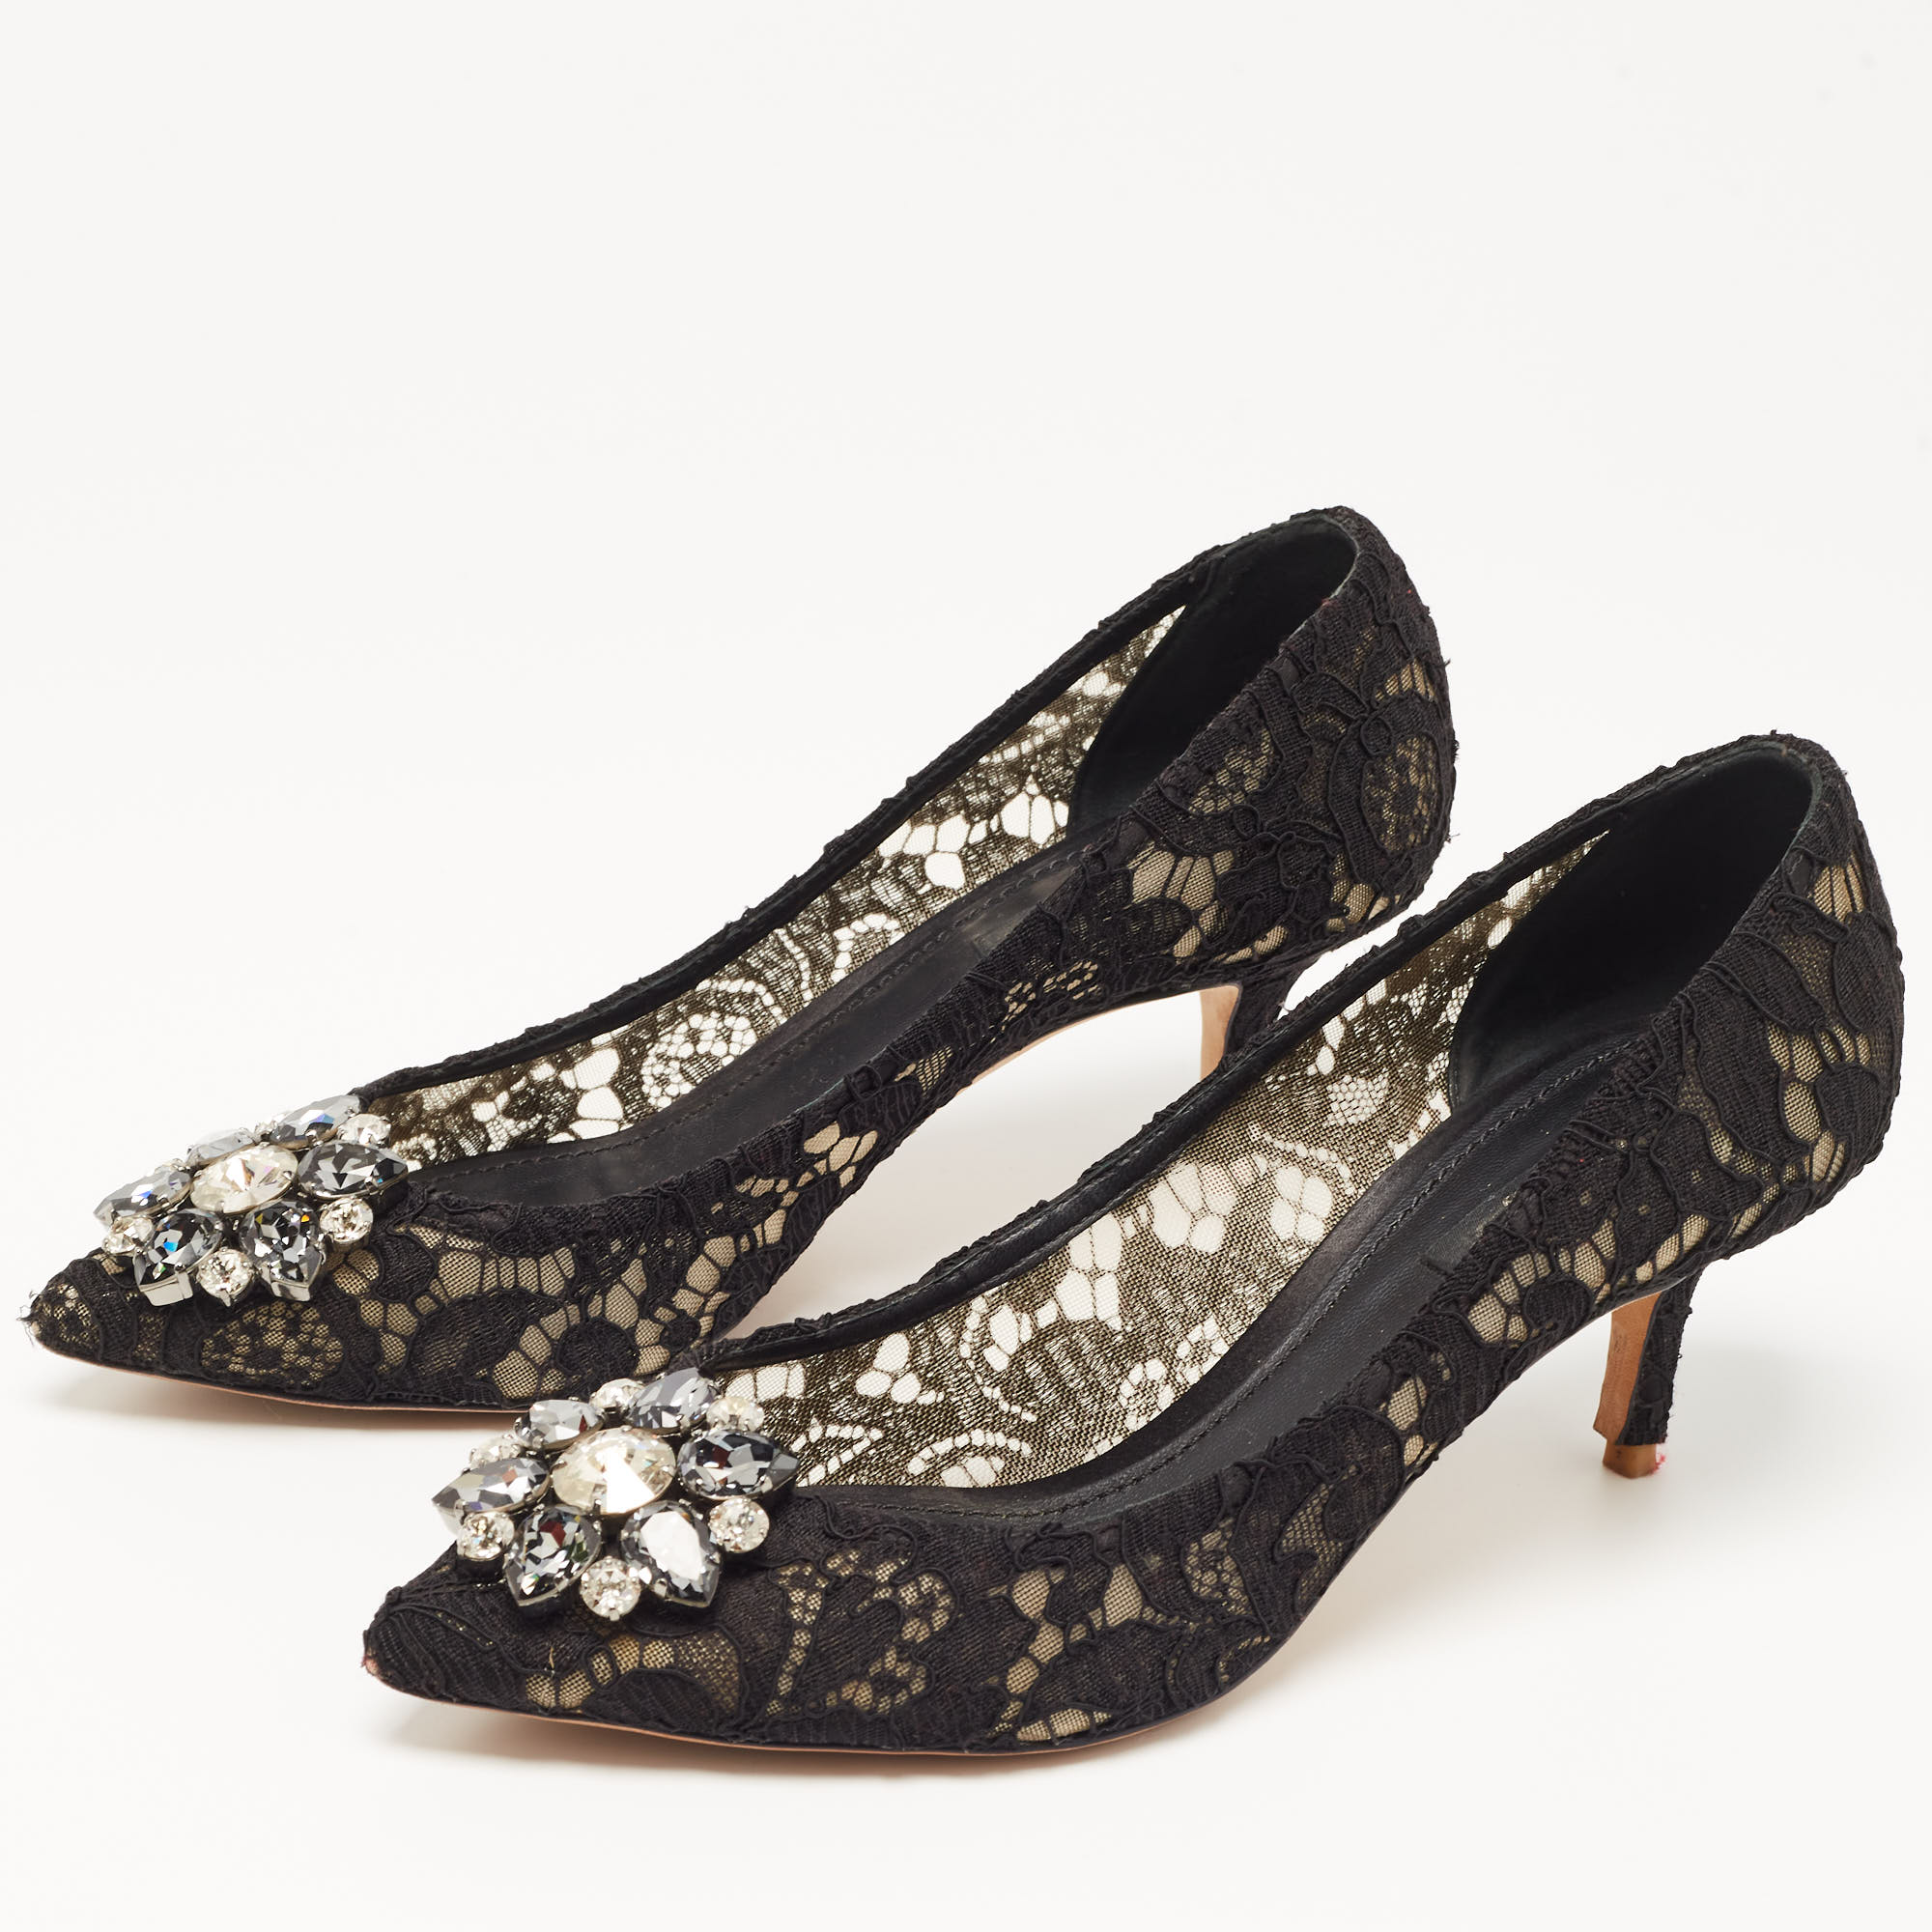 

Dolce & Gabbana Black Lace Bellucci Crystal Embellished Pointed Toe Pumps Size